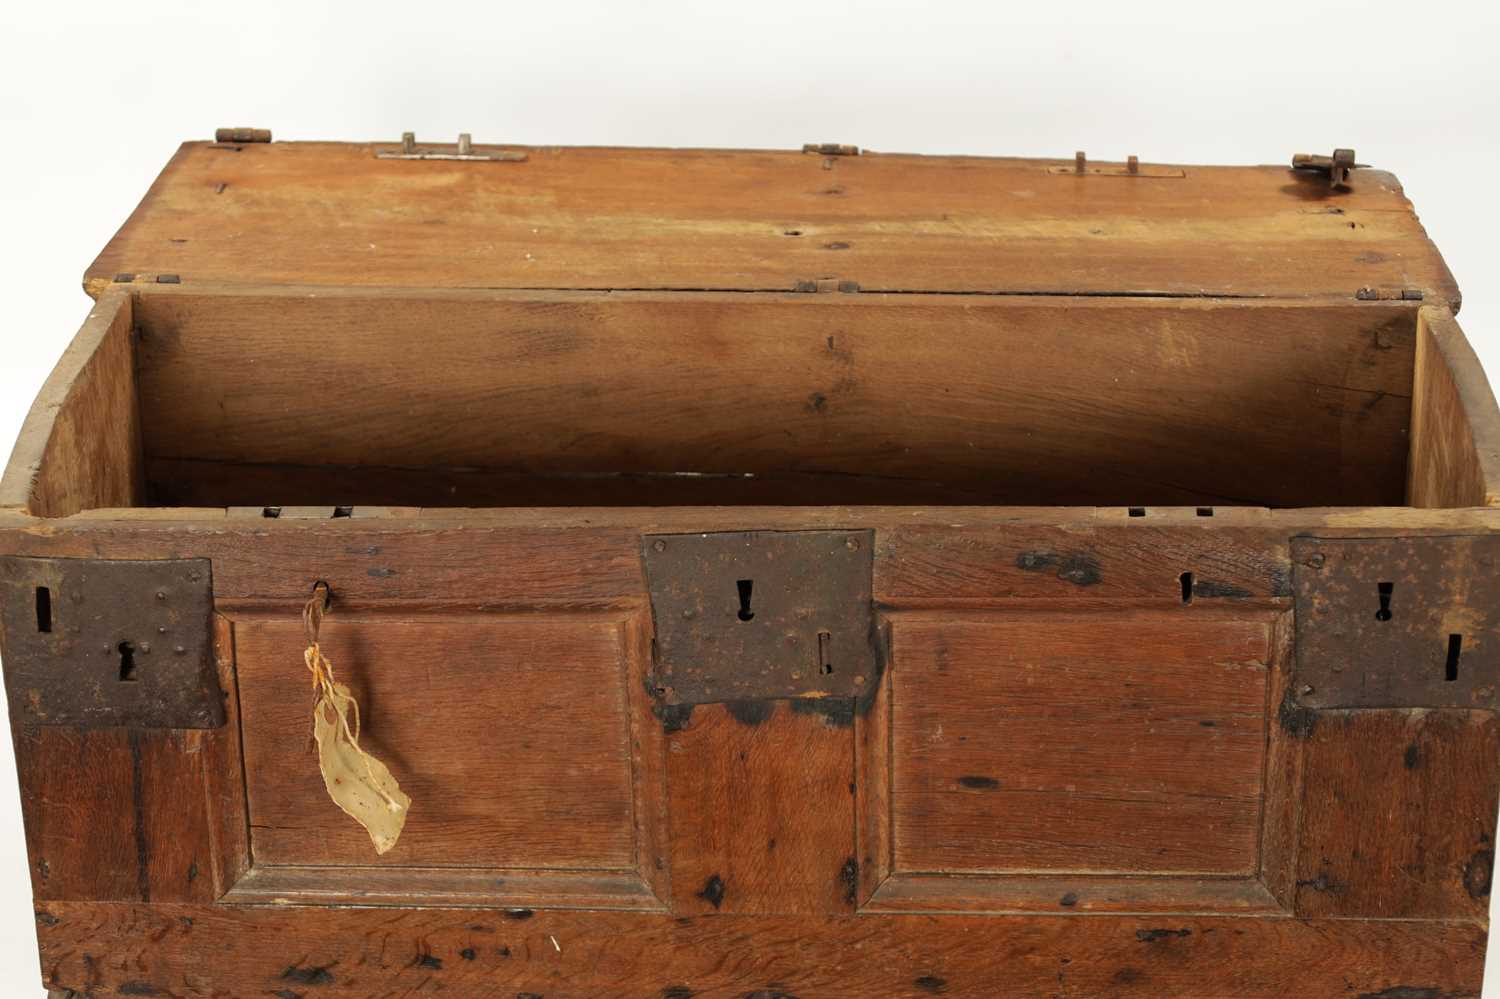 A RARE 16TH / 17TH CENTURY OAK IRON BOUND STRONG BOX/PLANK COFFER - Image 6 of 8